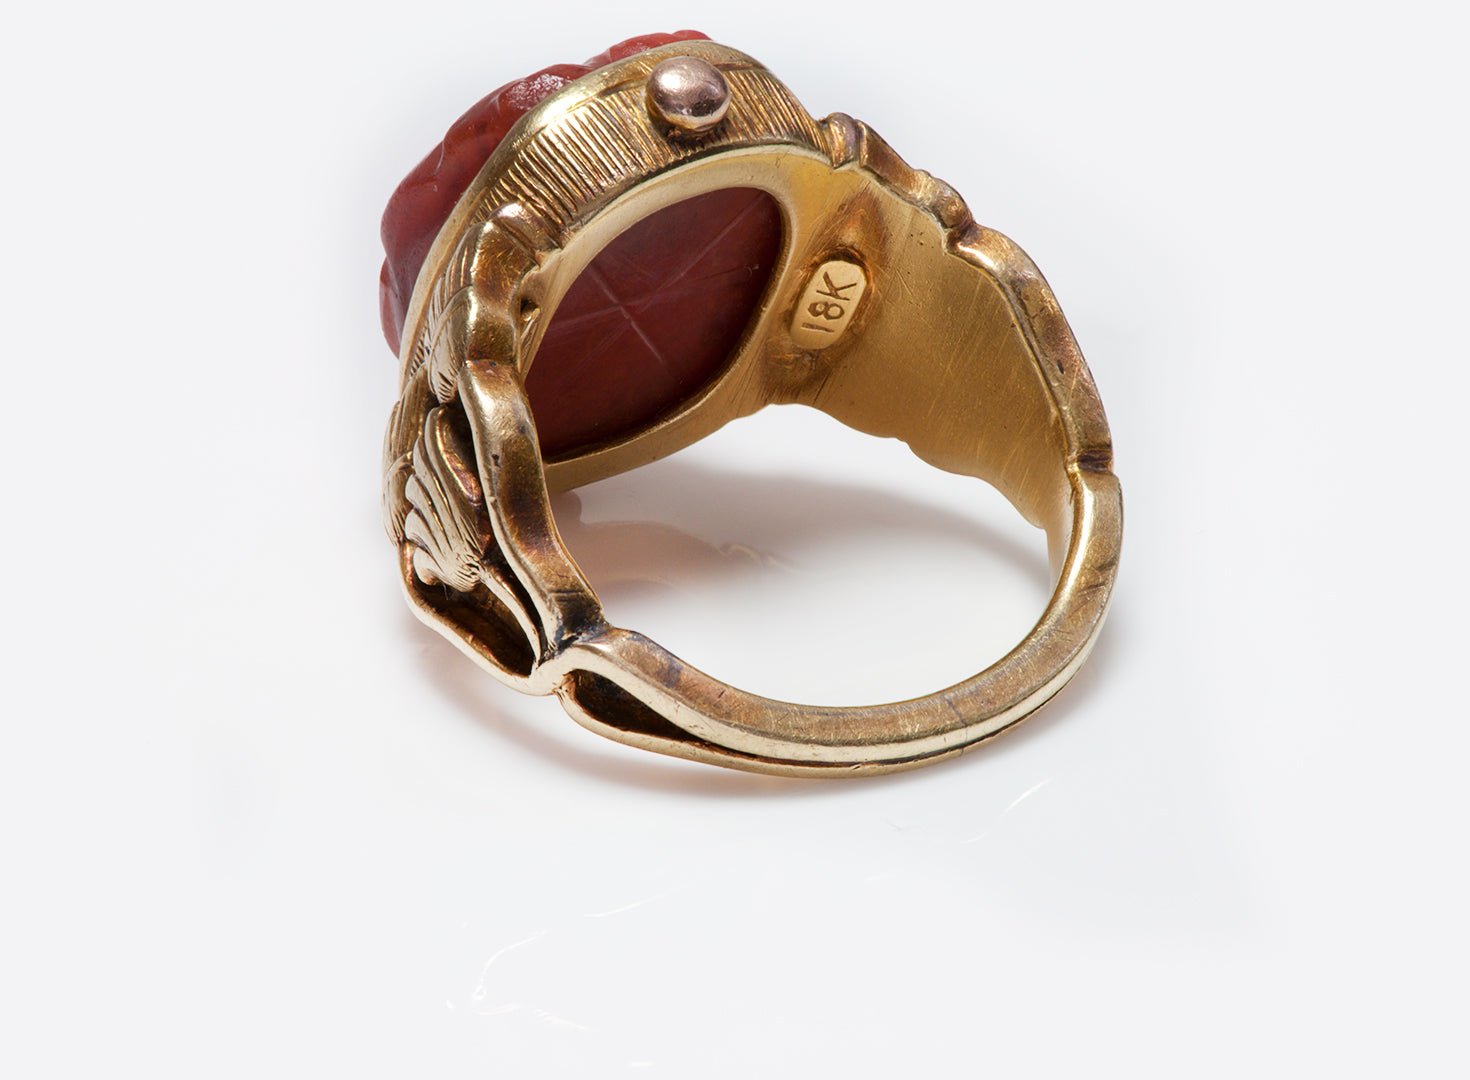 Antique Tiffany & Co. 18K Gold Carved Stone Scarab Ring by Gustav Manz